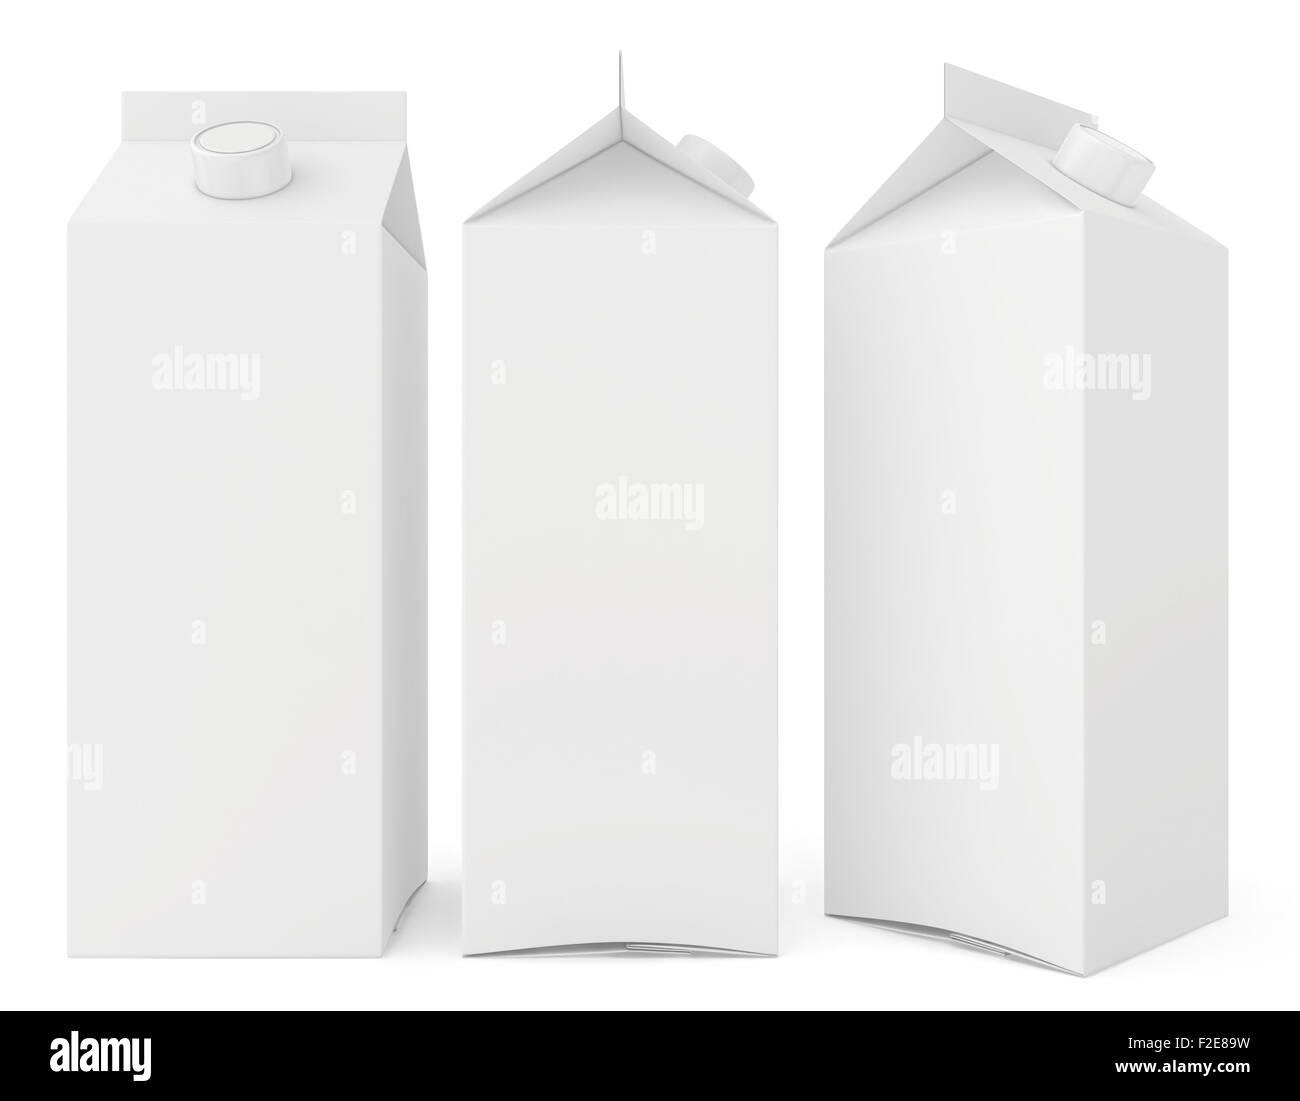 Milk cartons isolated on white background. 3d render Stock Photo